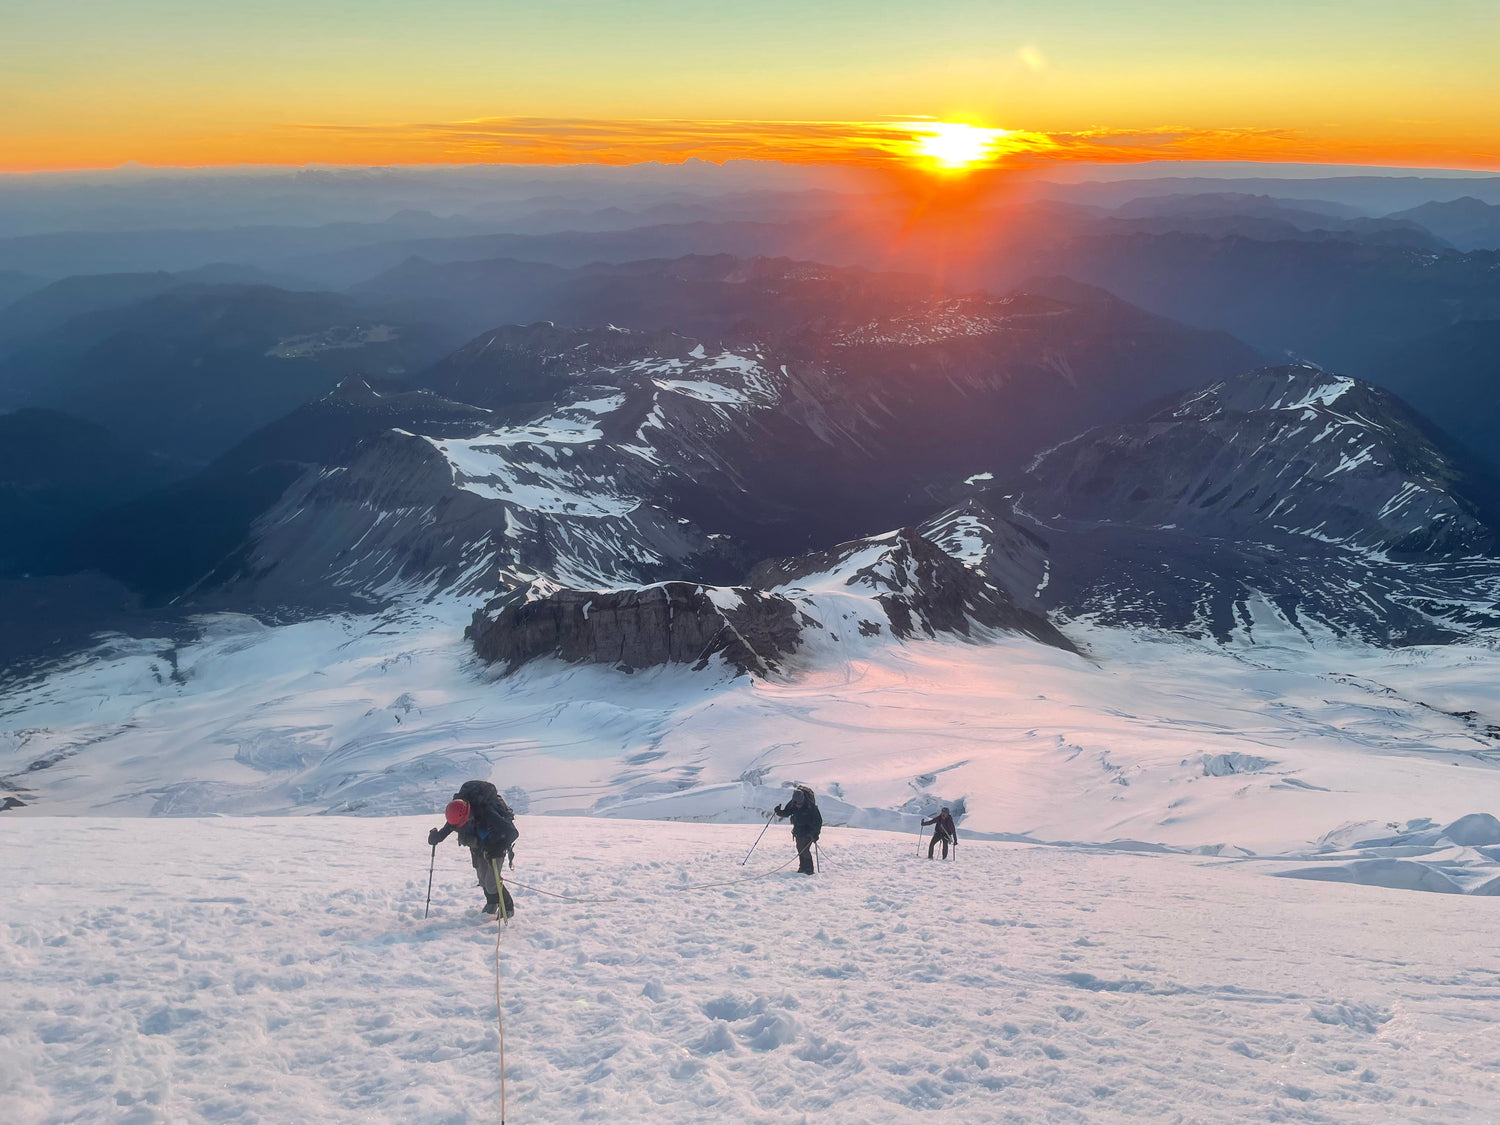 Sunrise over the Emmons Glacier as mountaineers climb the glacier